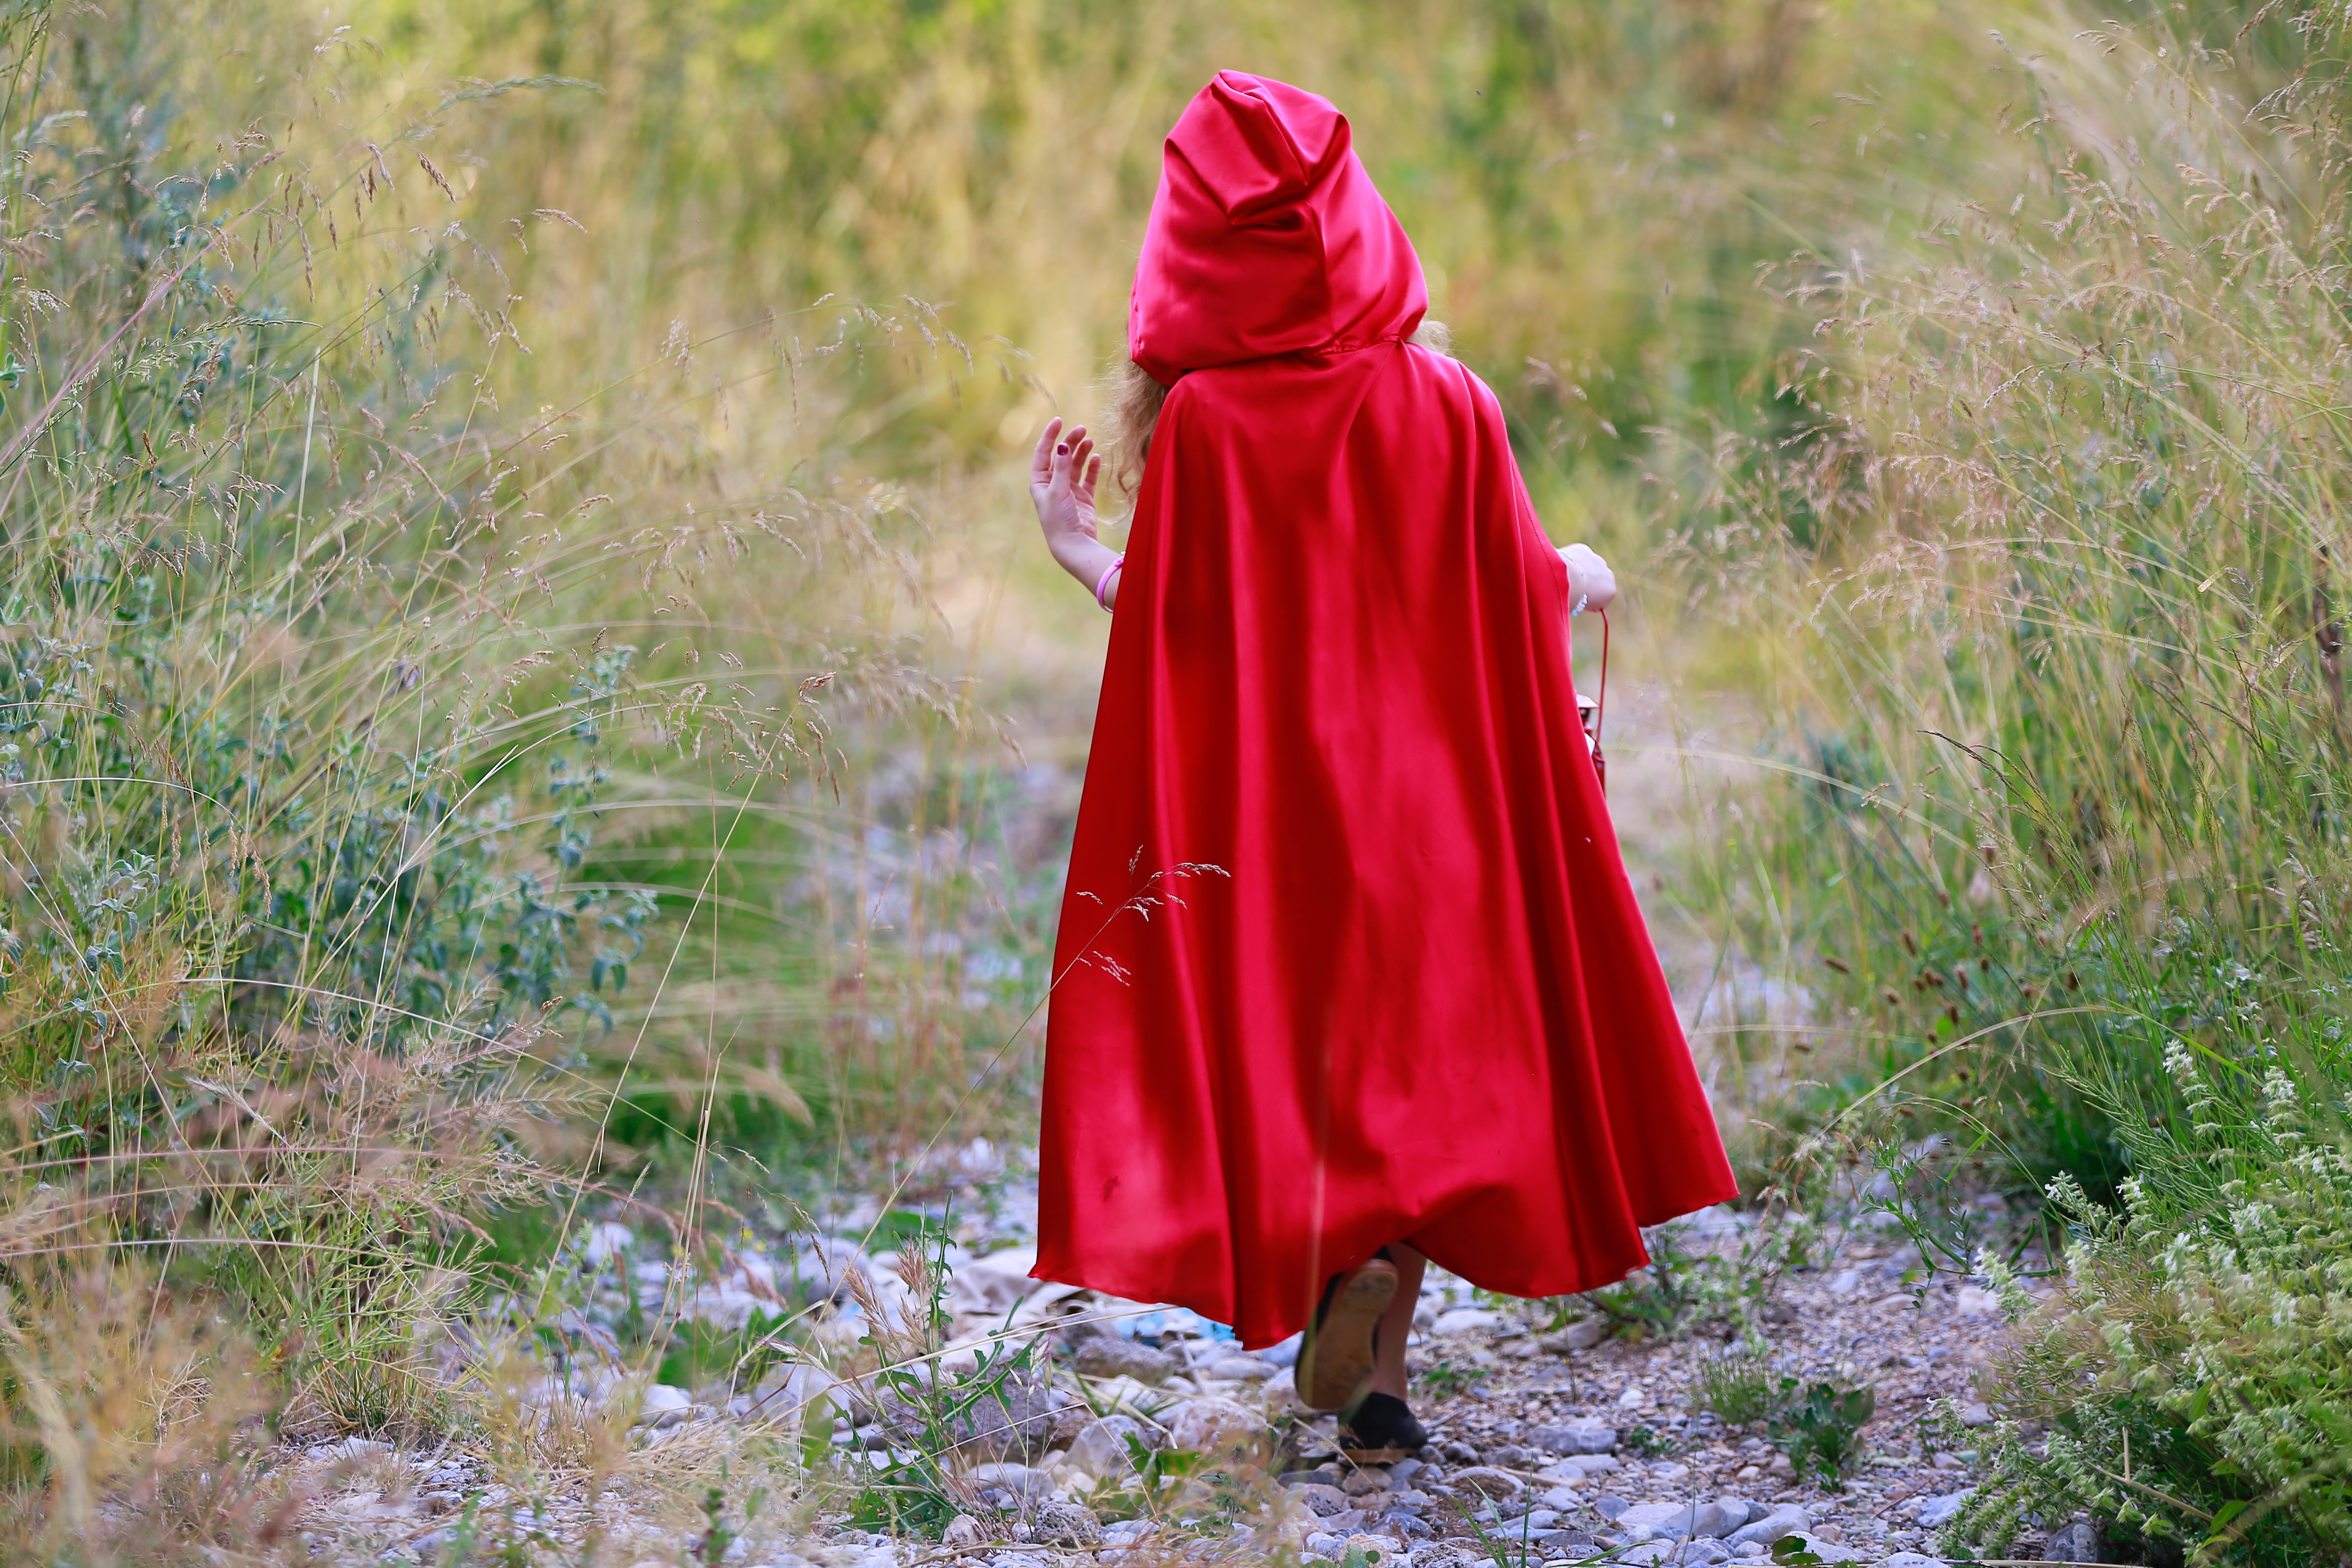 android grass, red, miscellanea, miscellaneous, stroll, child, mantle